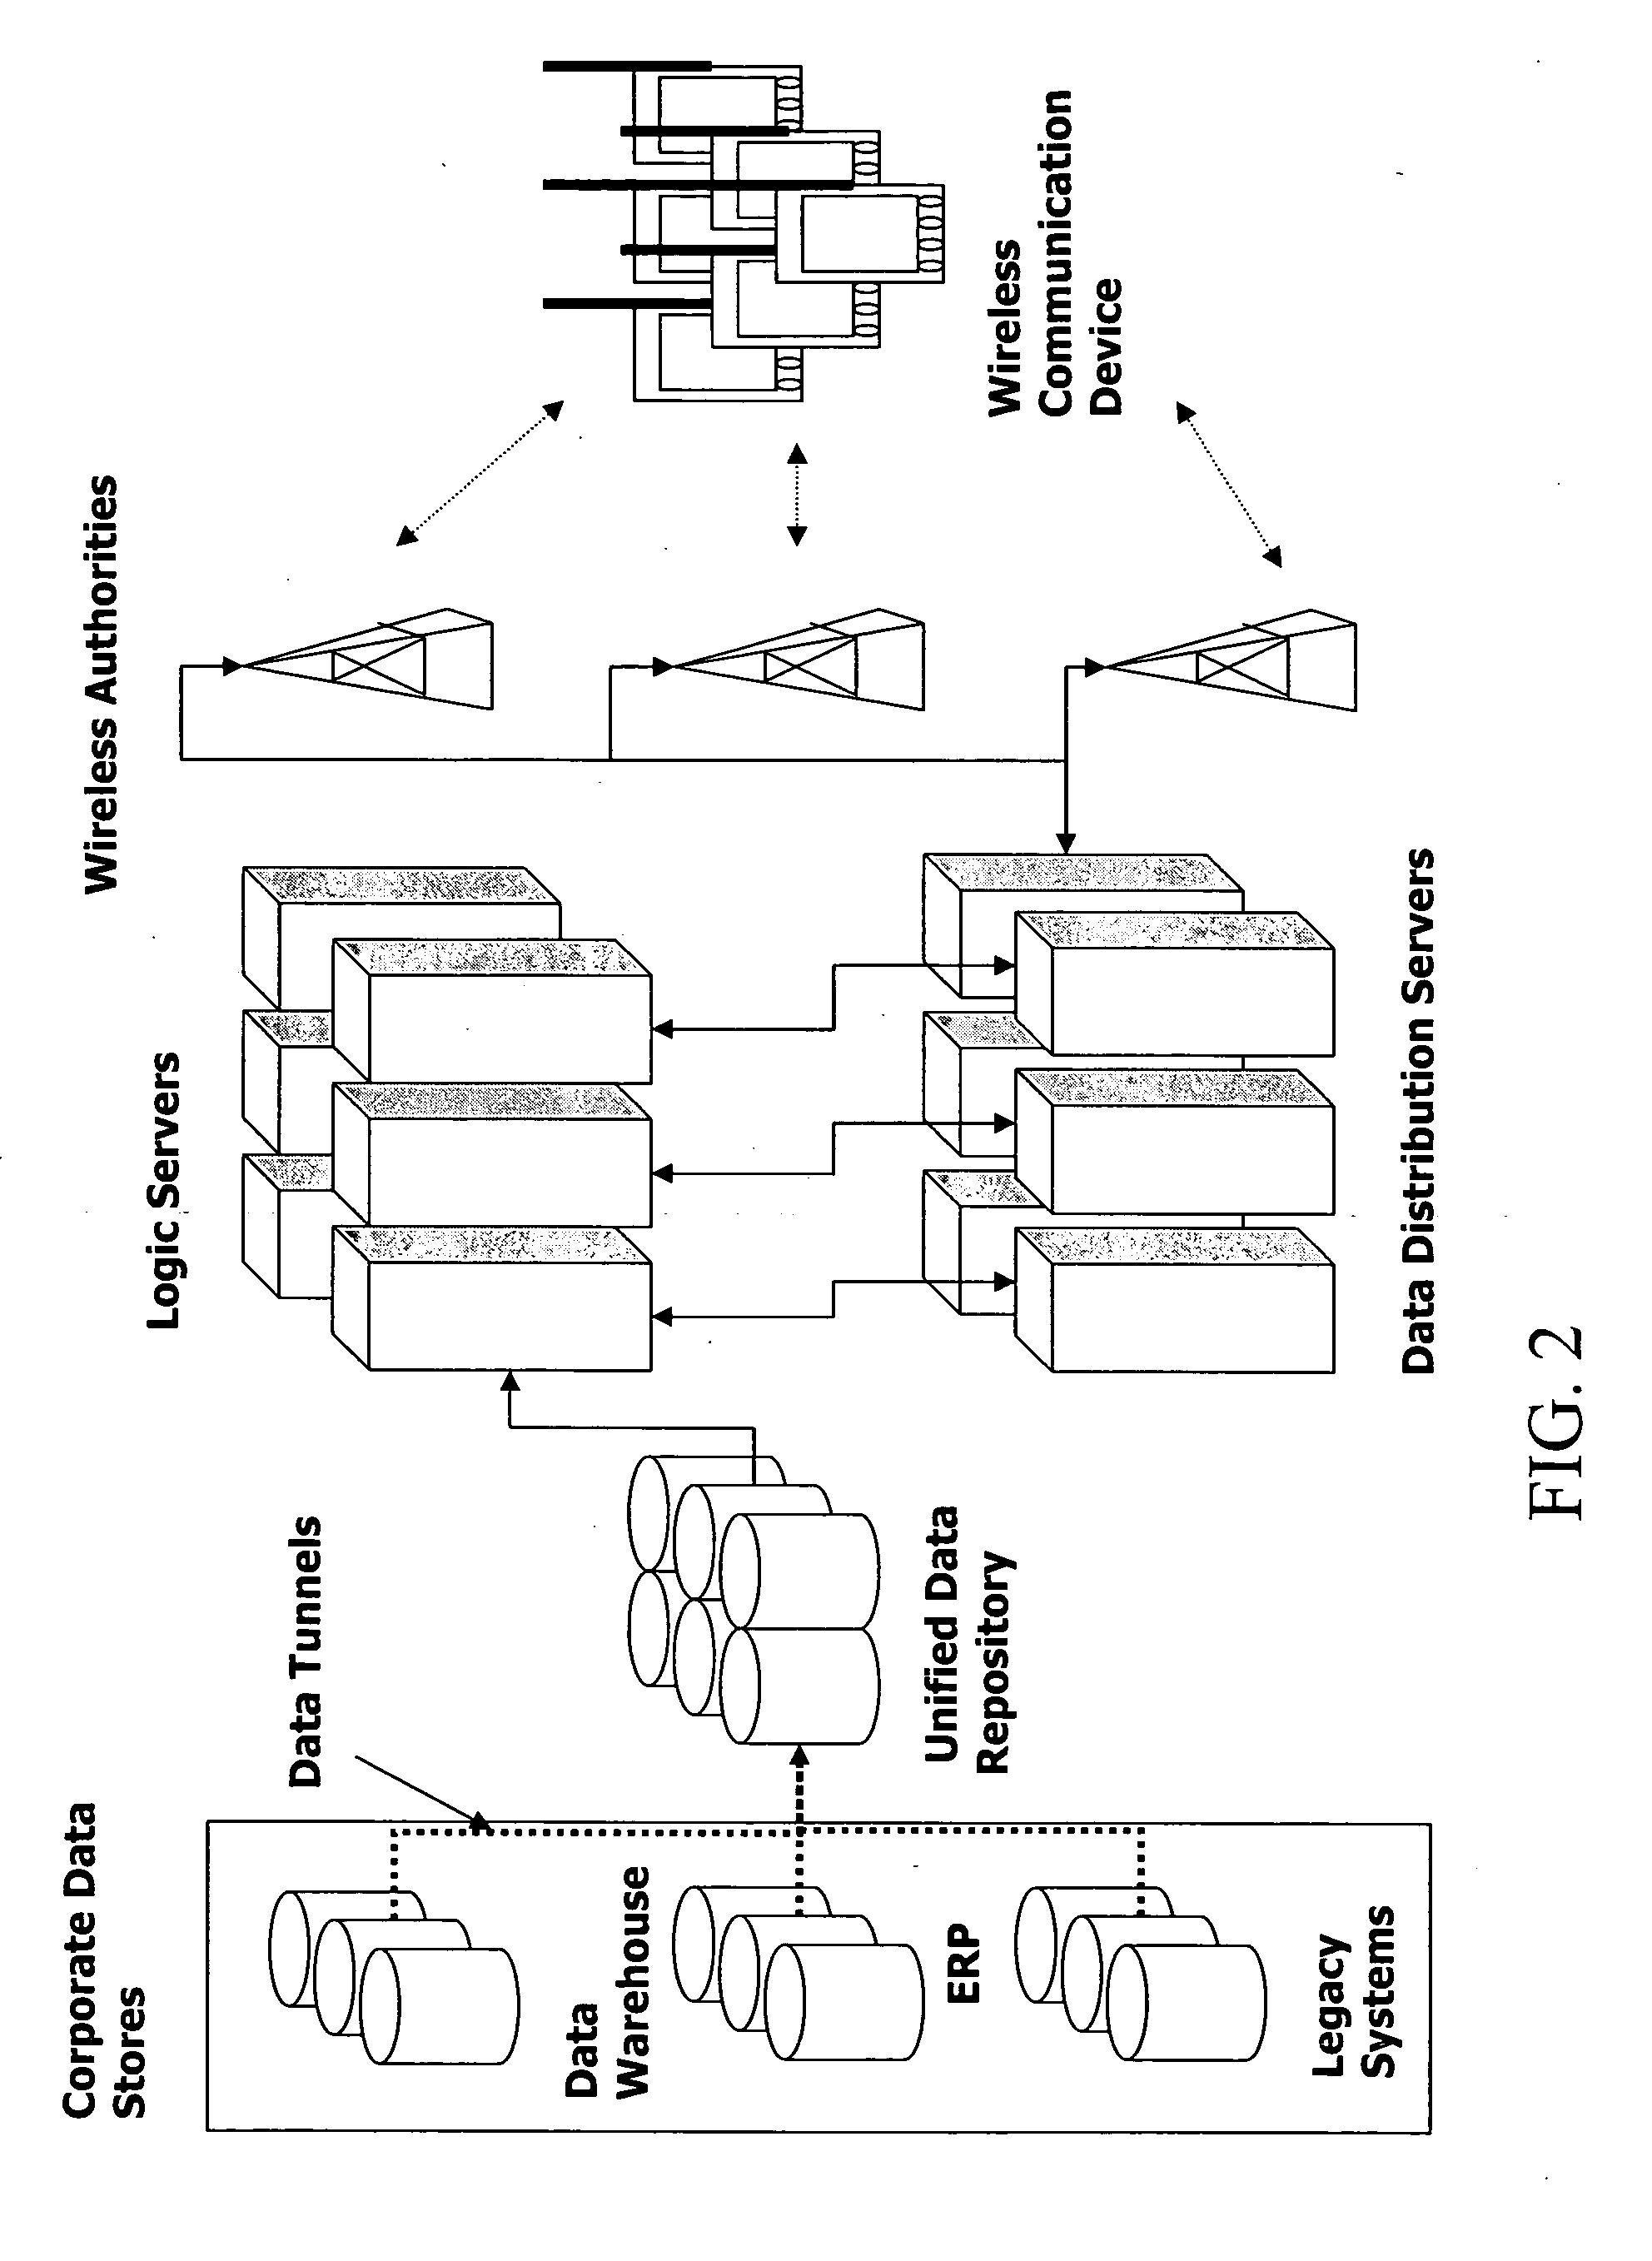 System and method of real time data accessing and initializing commands via wireless communication device